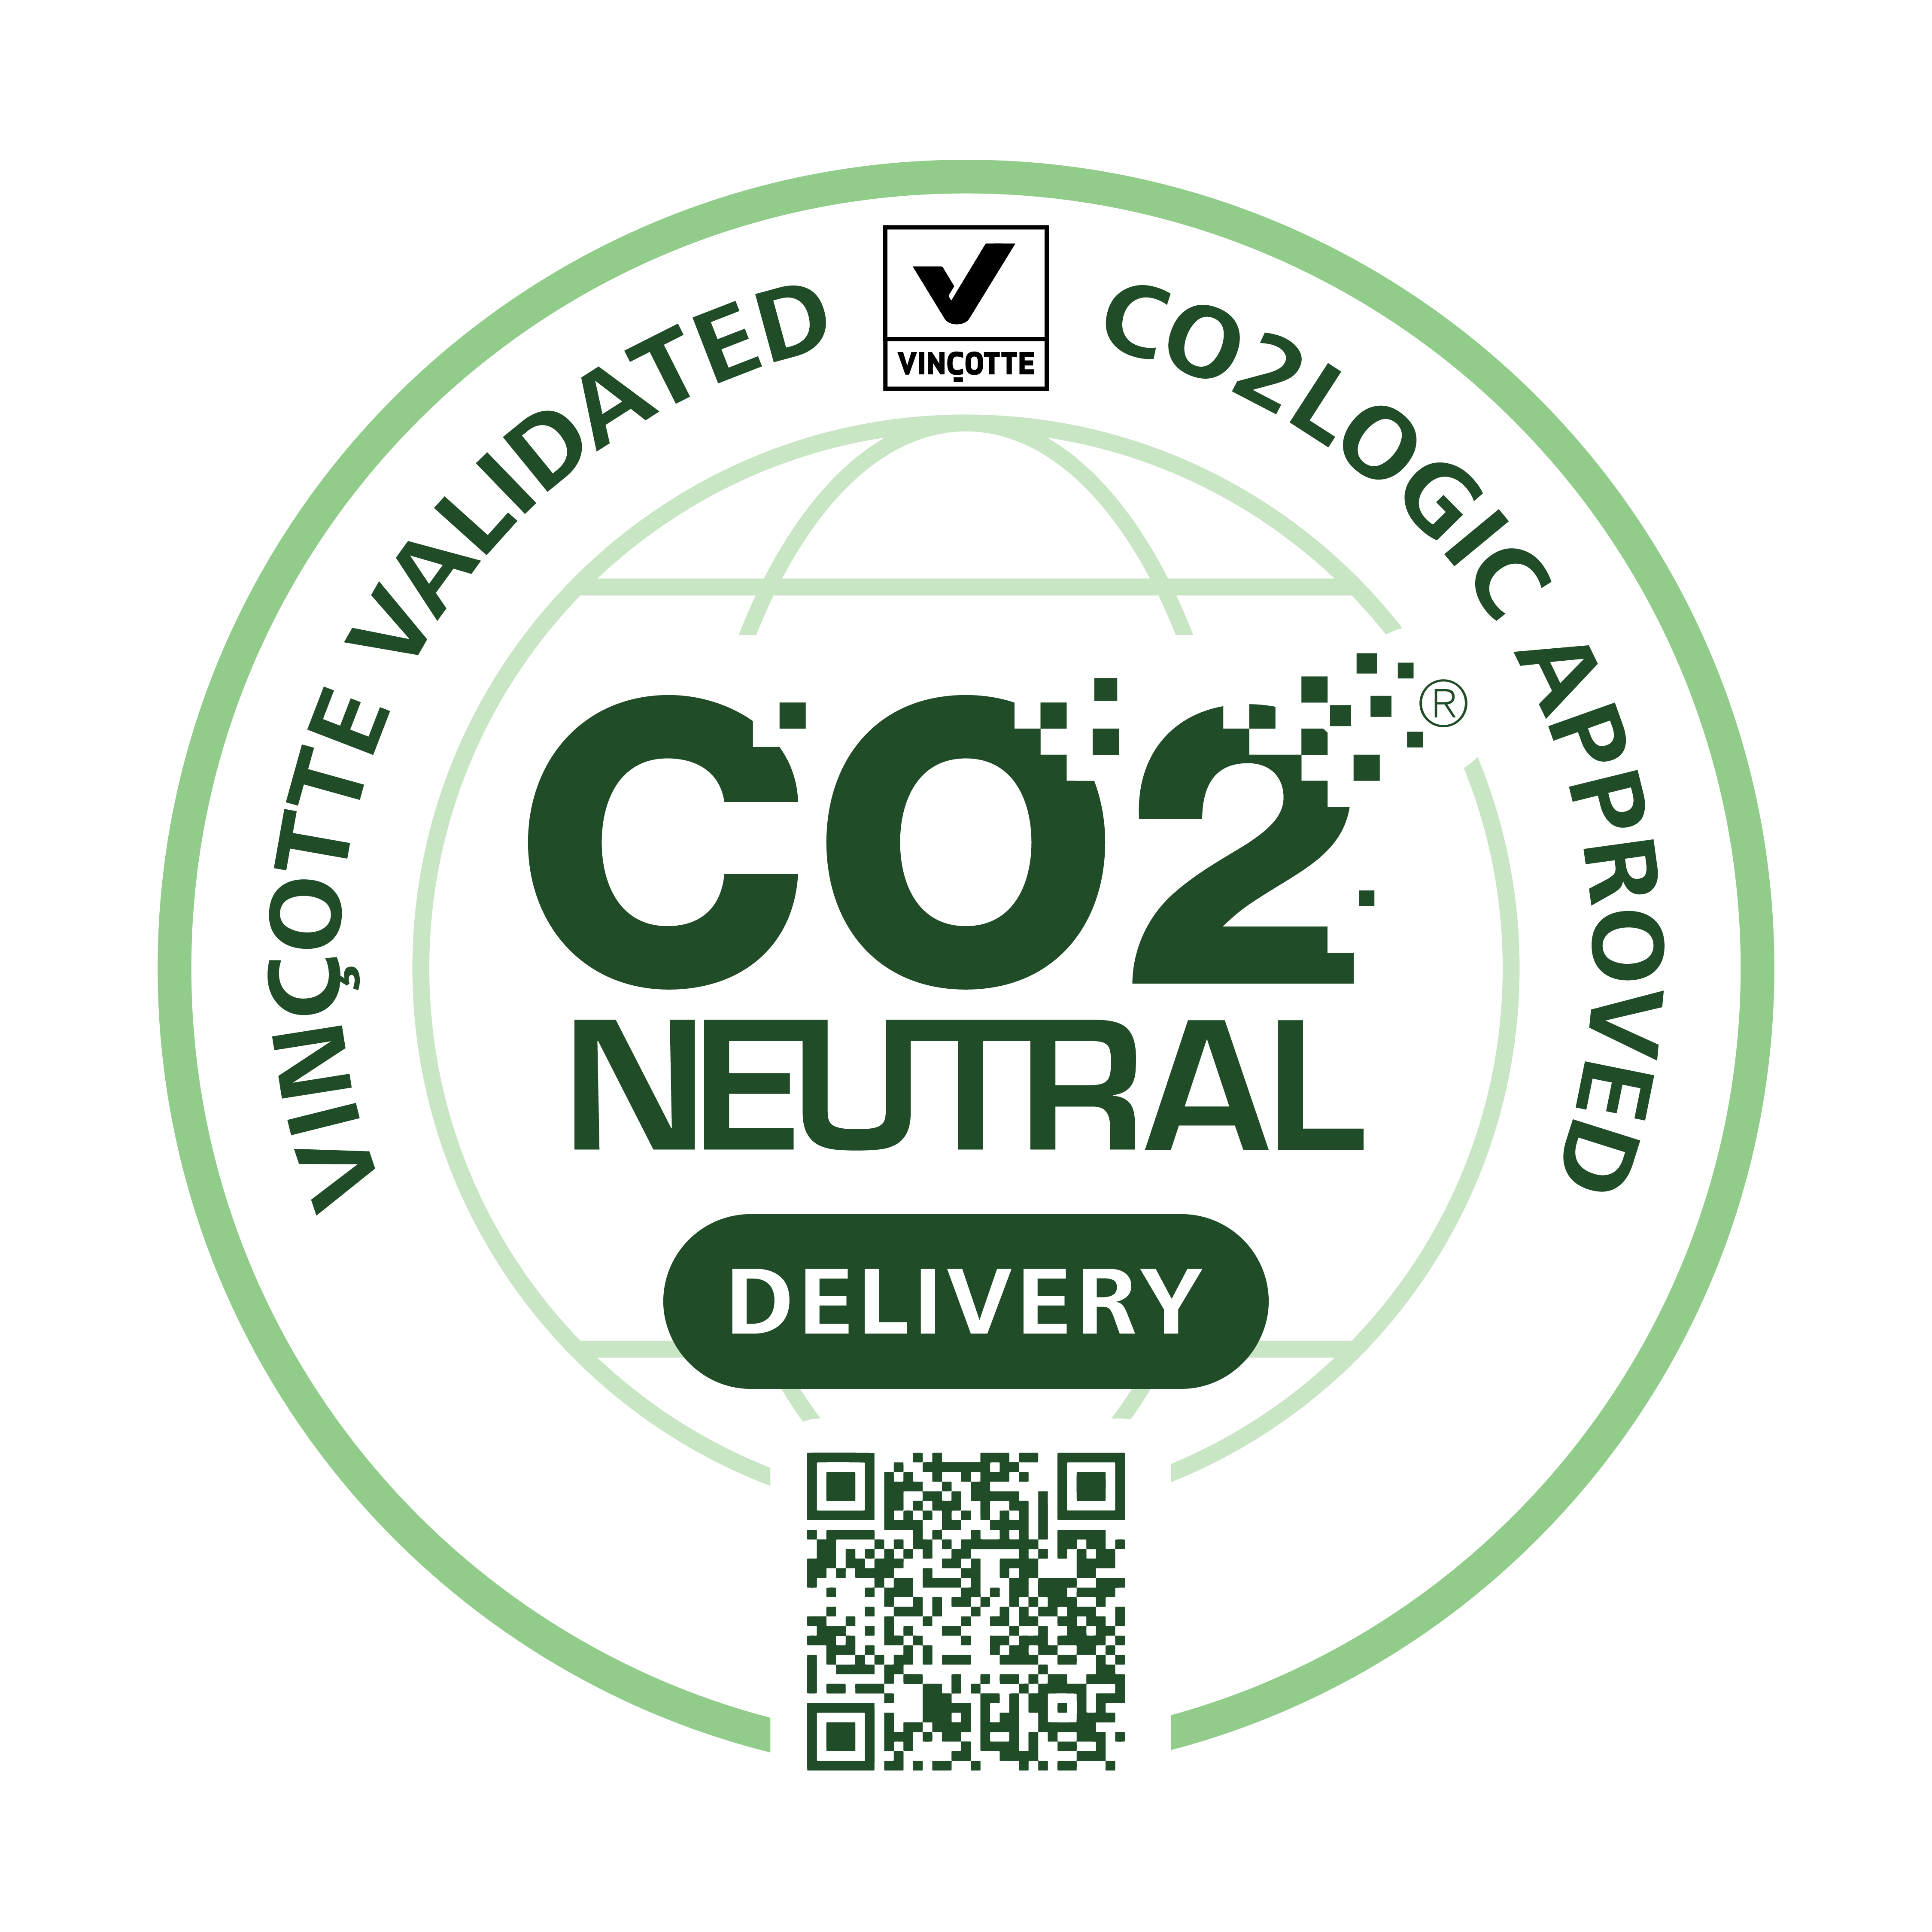 CO2 neutral delivery of your mailings and parcels in Belgium